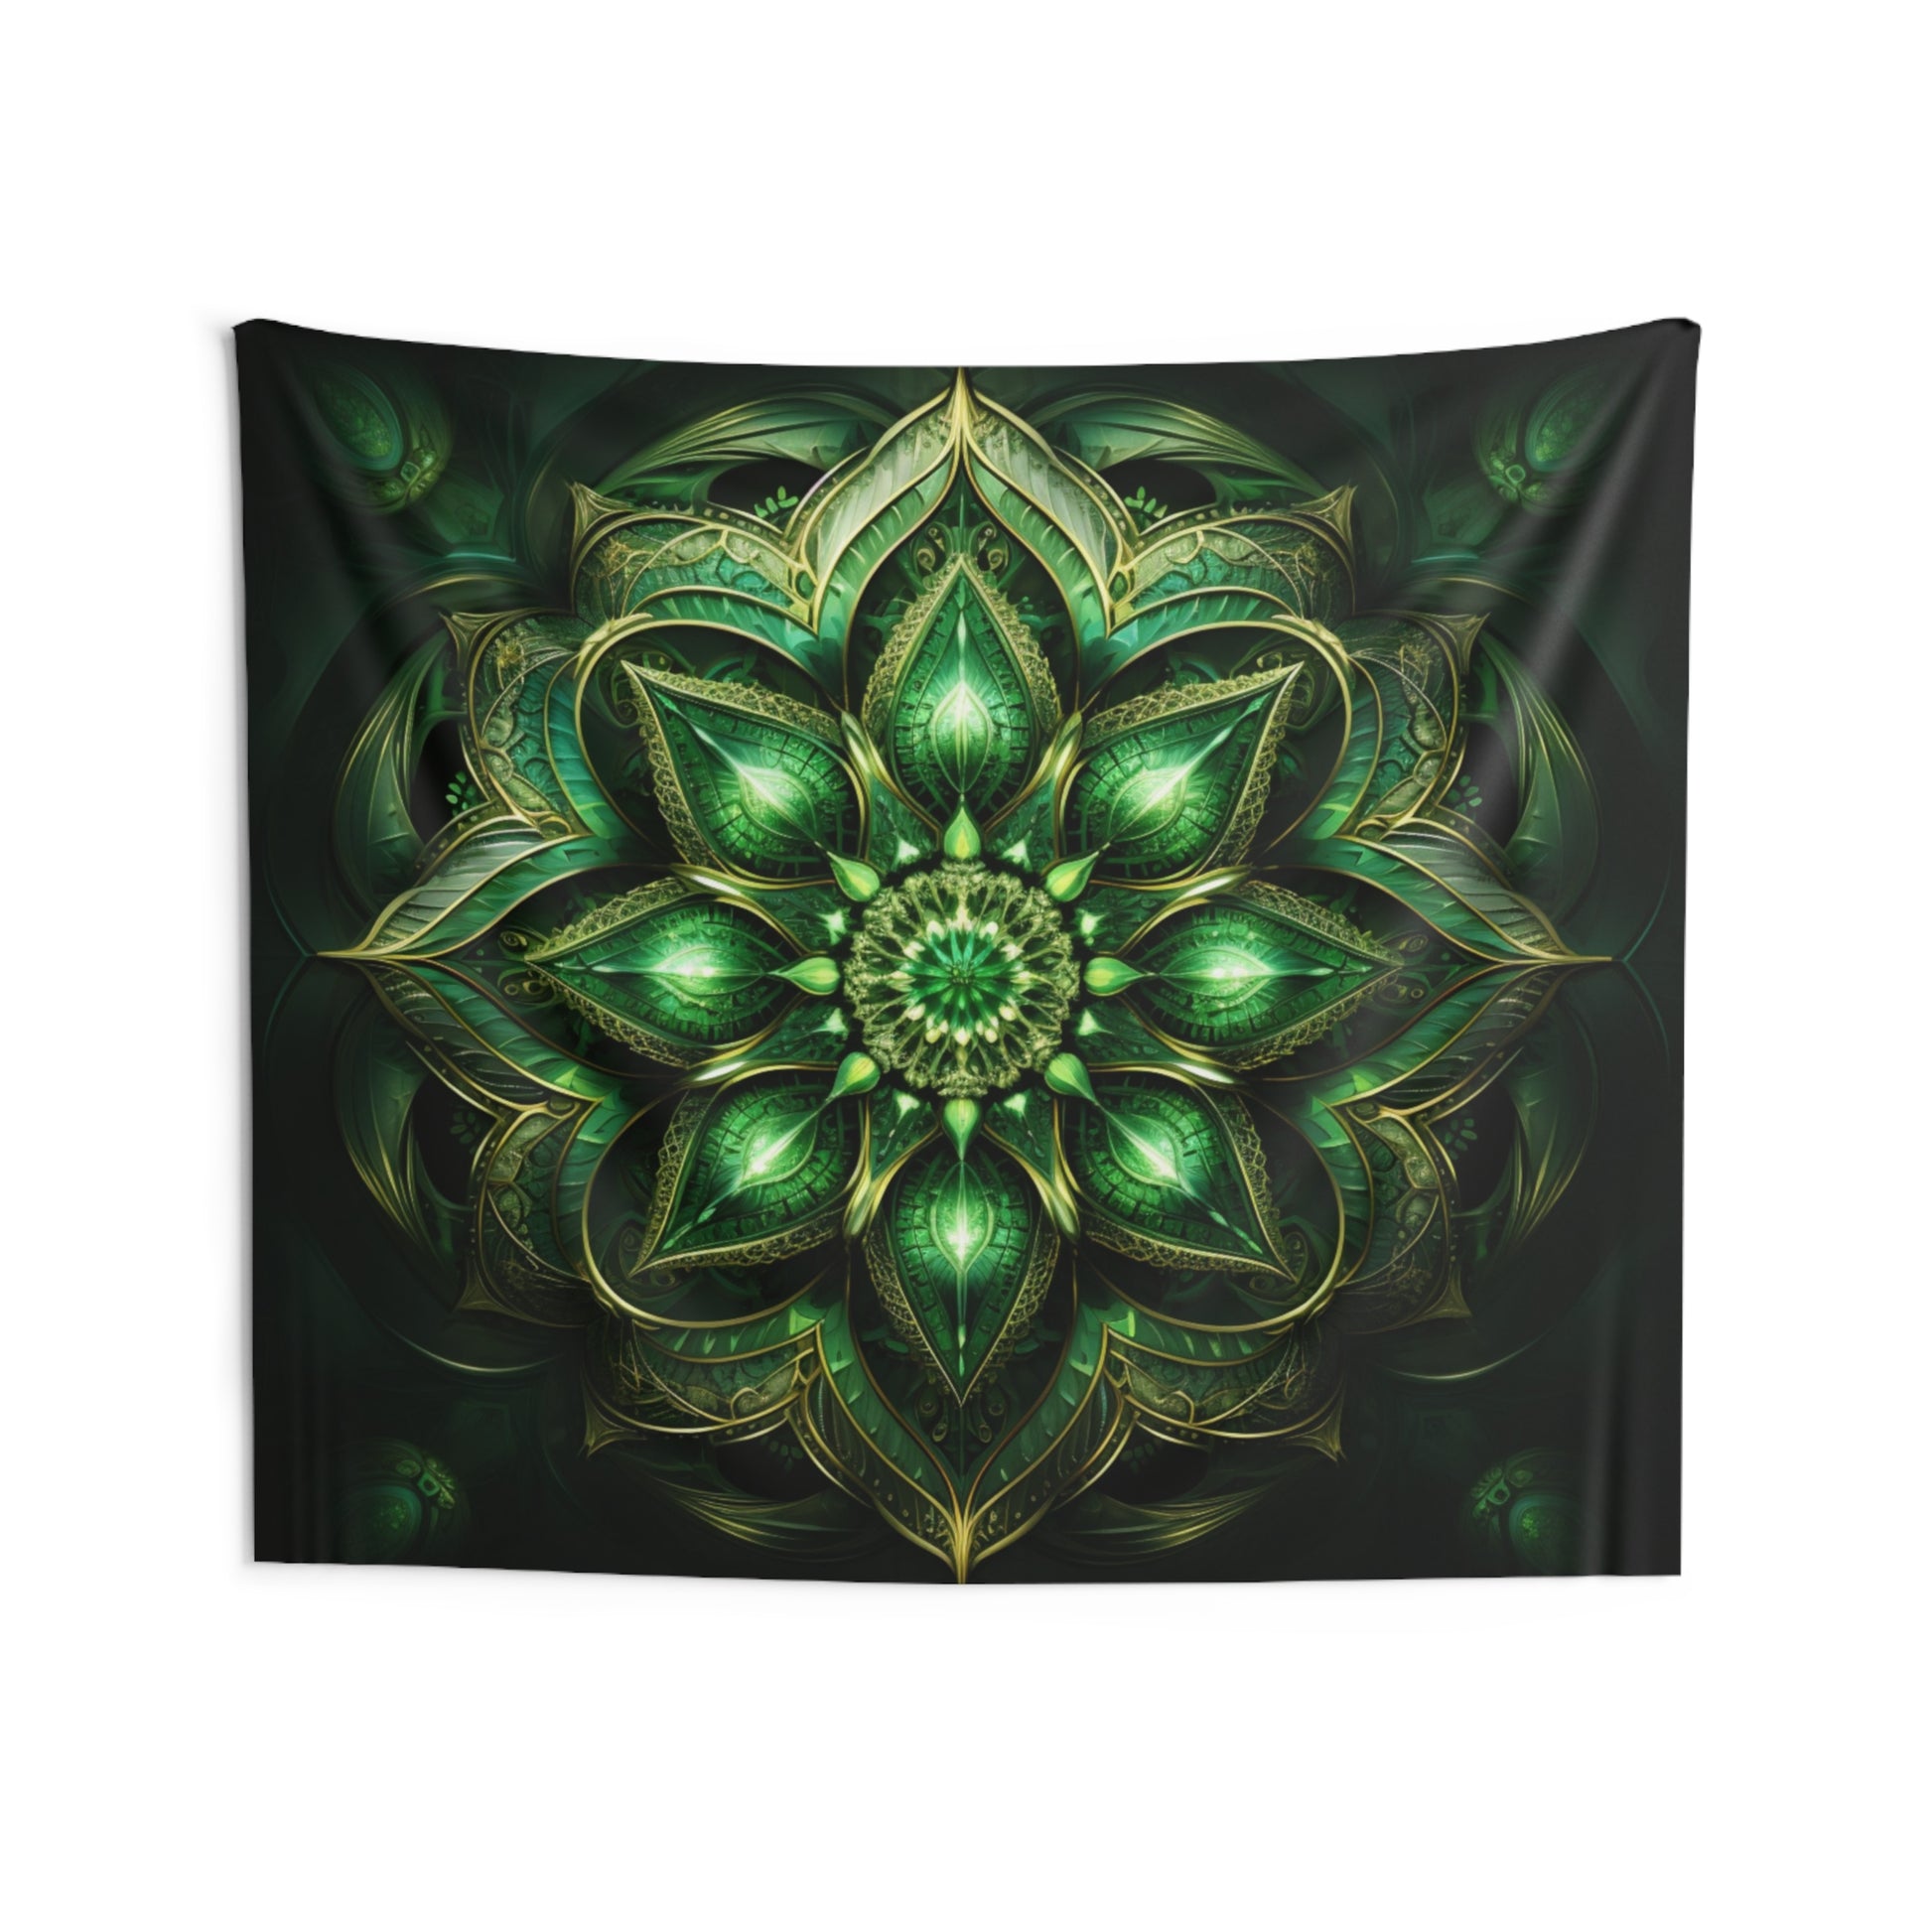 Green Mandala Tapestry, Wall Art Hanging Cool Unique Landscape Aesthetic Large Small Decor Bedroom College Dorm Room Starcove Fashion